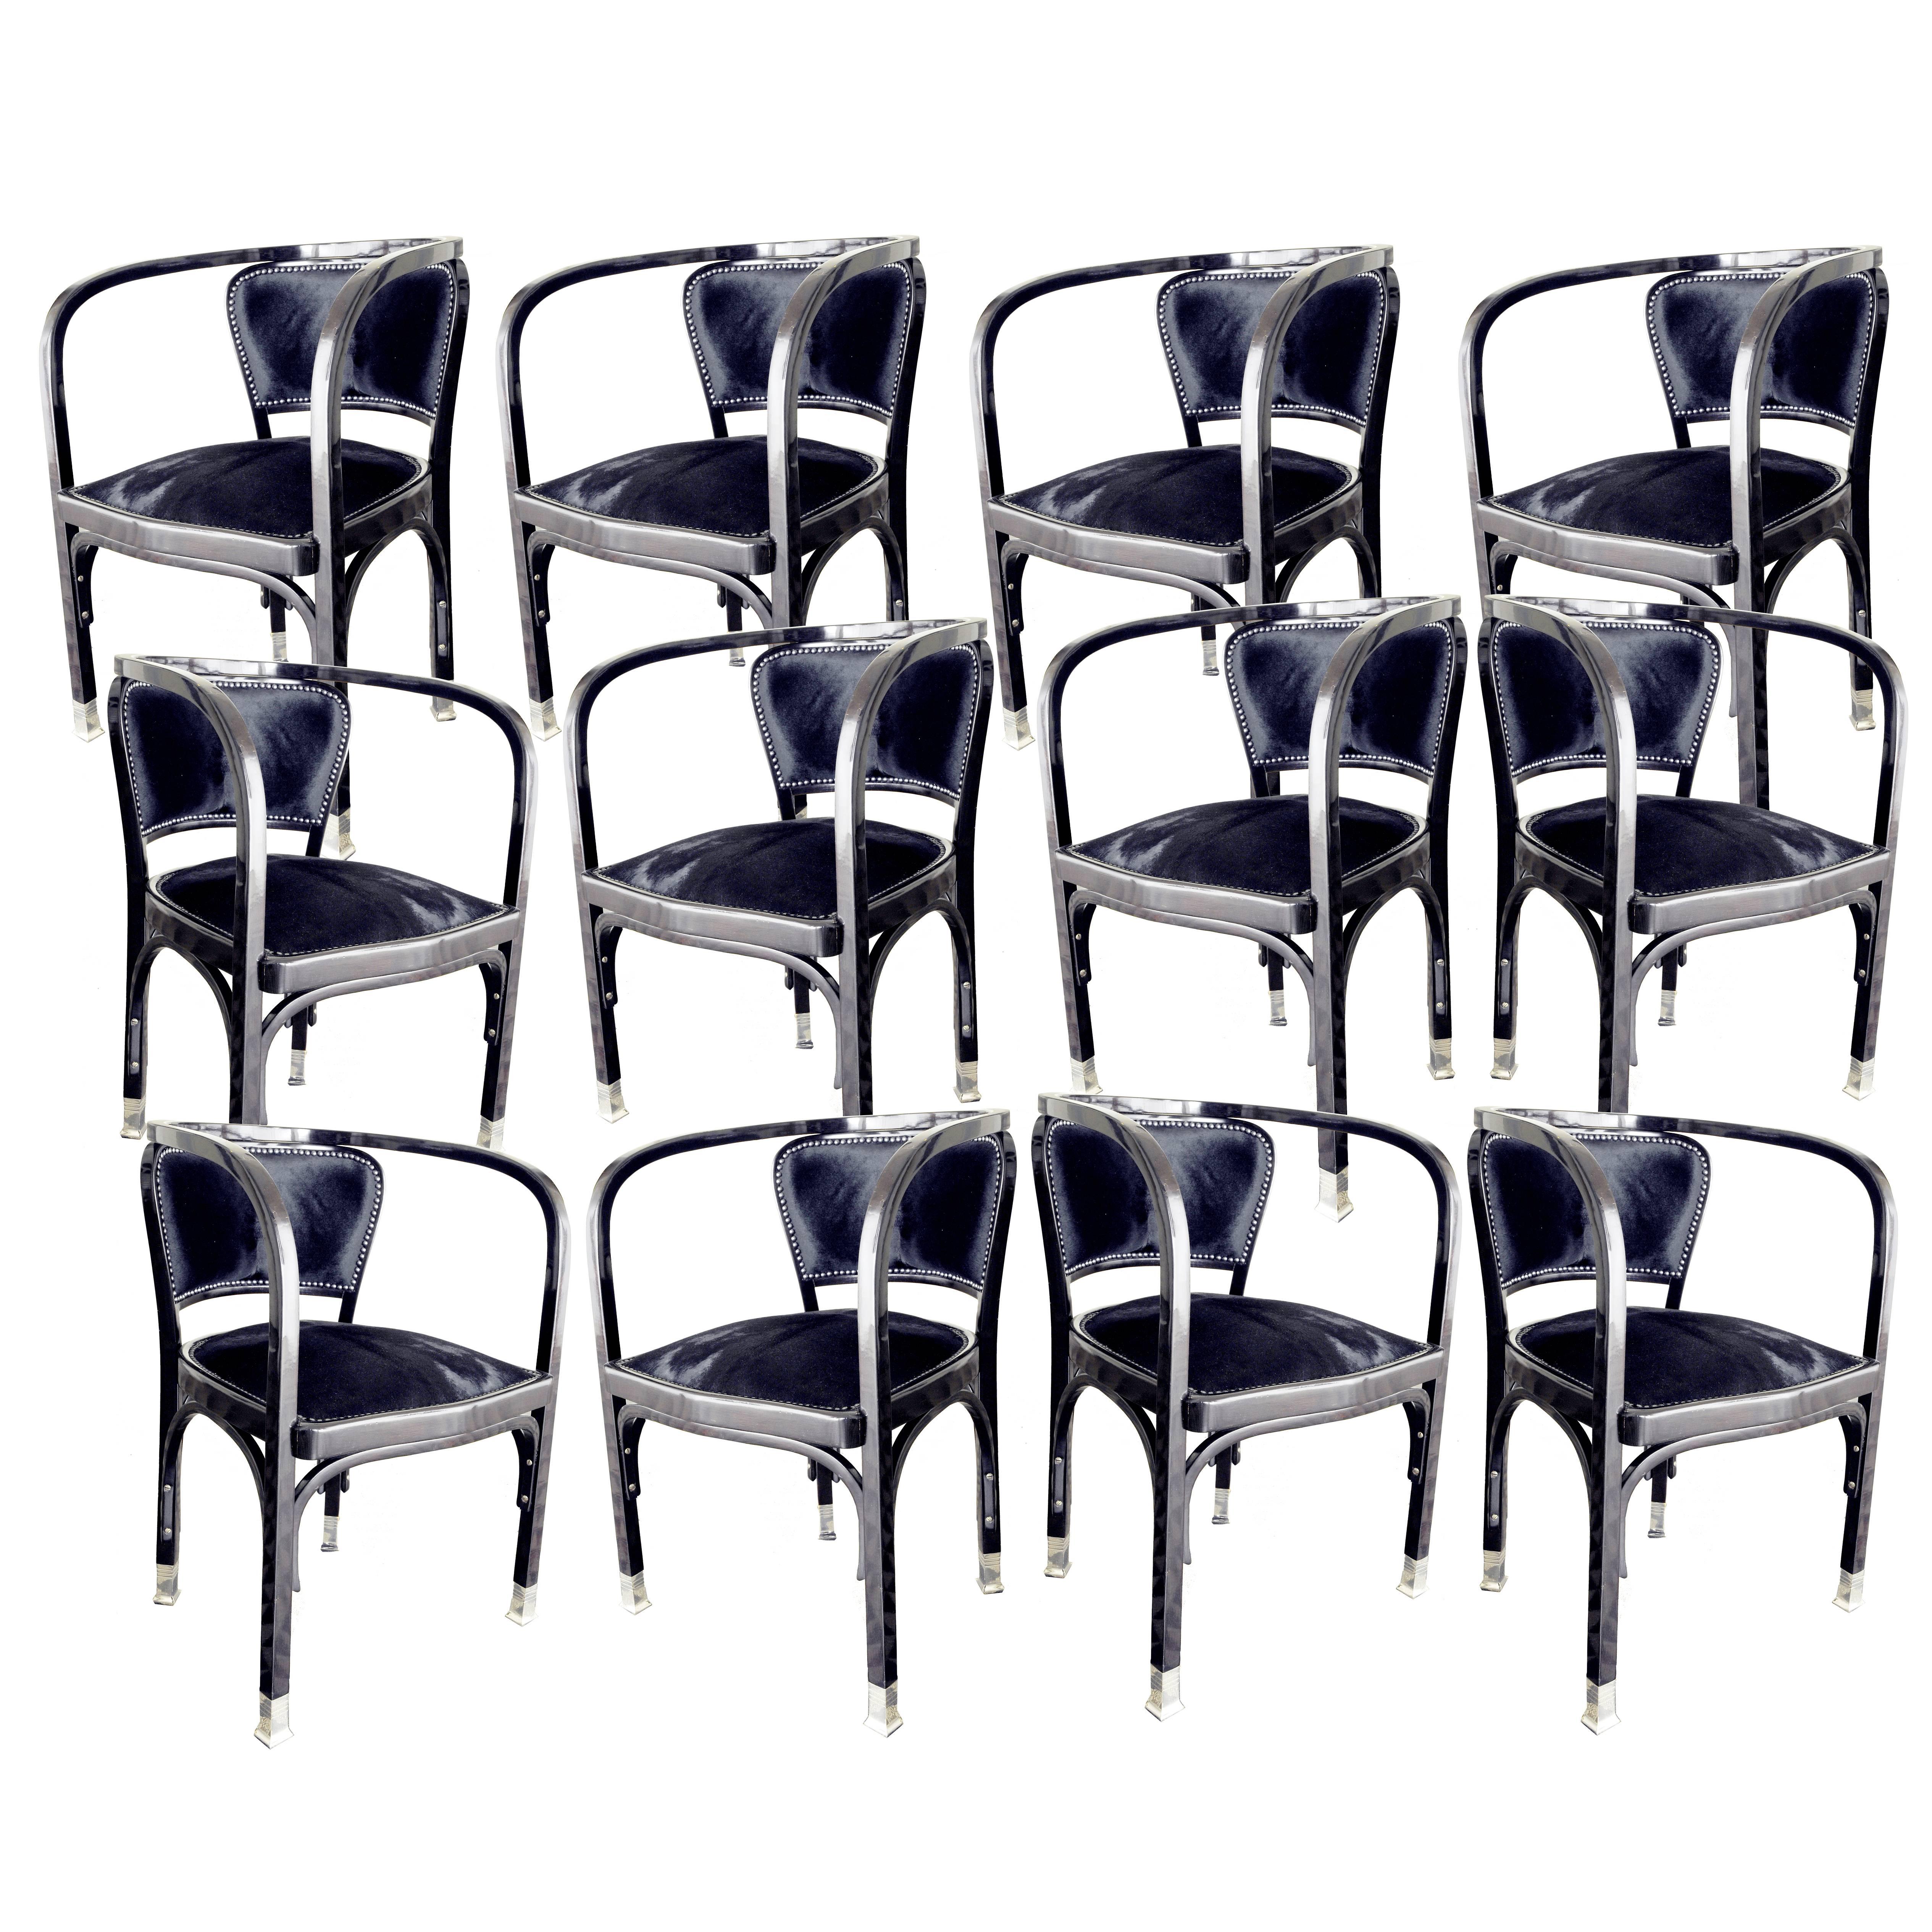 Great set of 12 Armchairs Designed by Gustav Siegel, 1900s